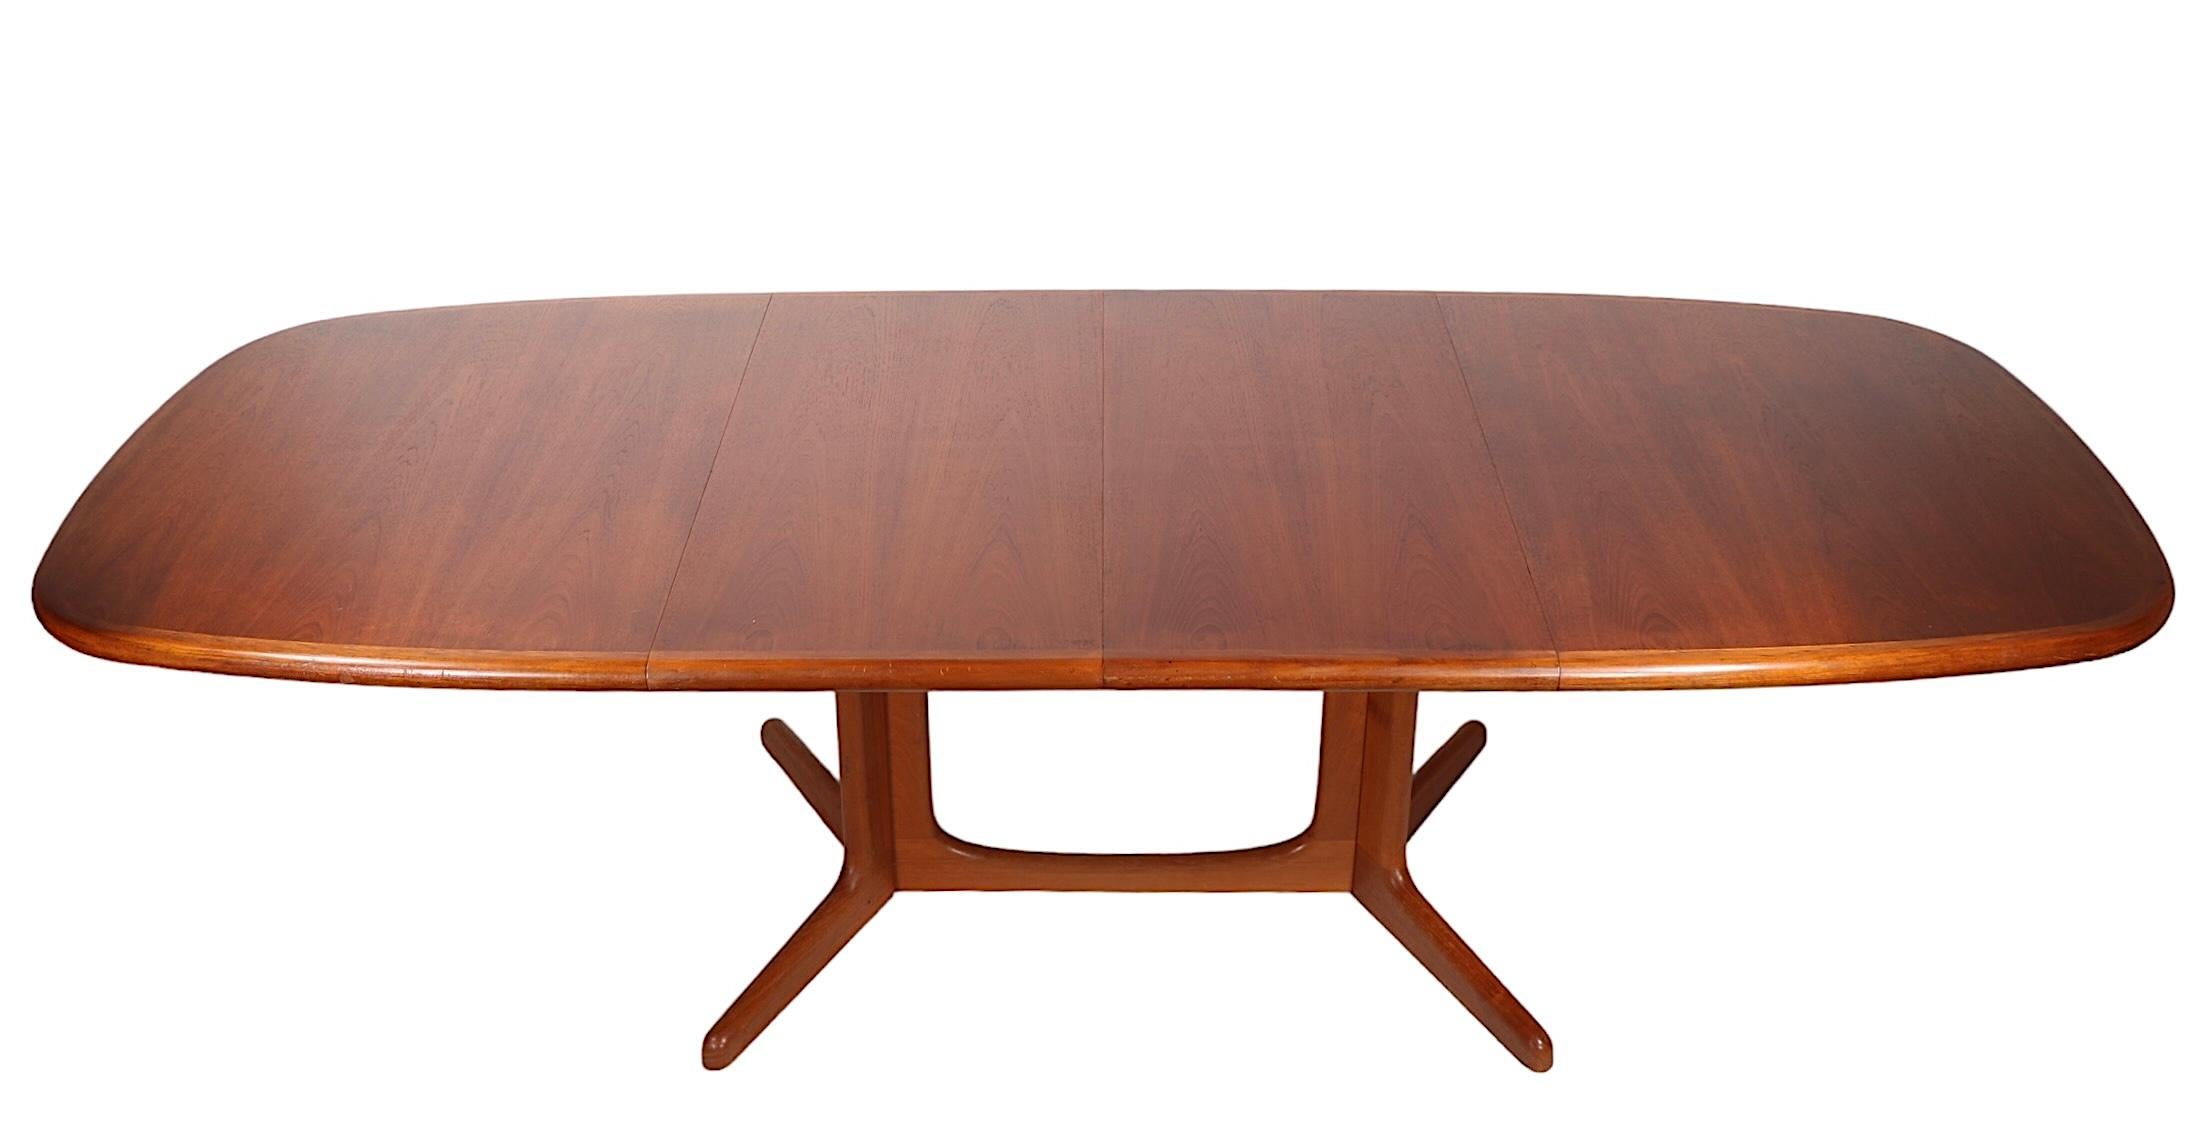 Danish Mid Century Oval Teak Dining Table by Niels Otto Moller for Gudme c 1970s For Sale 7